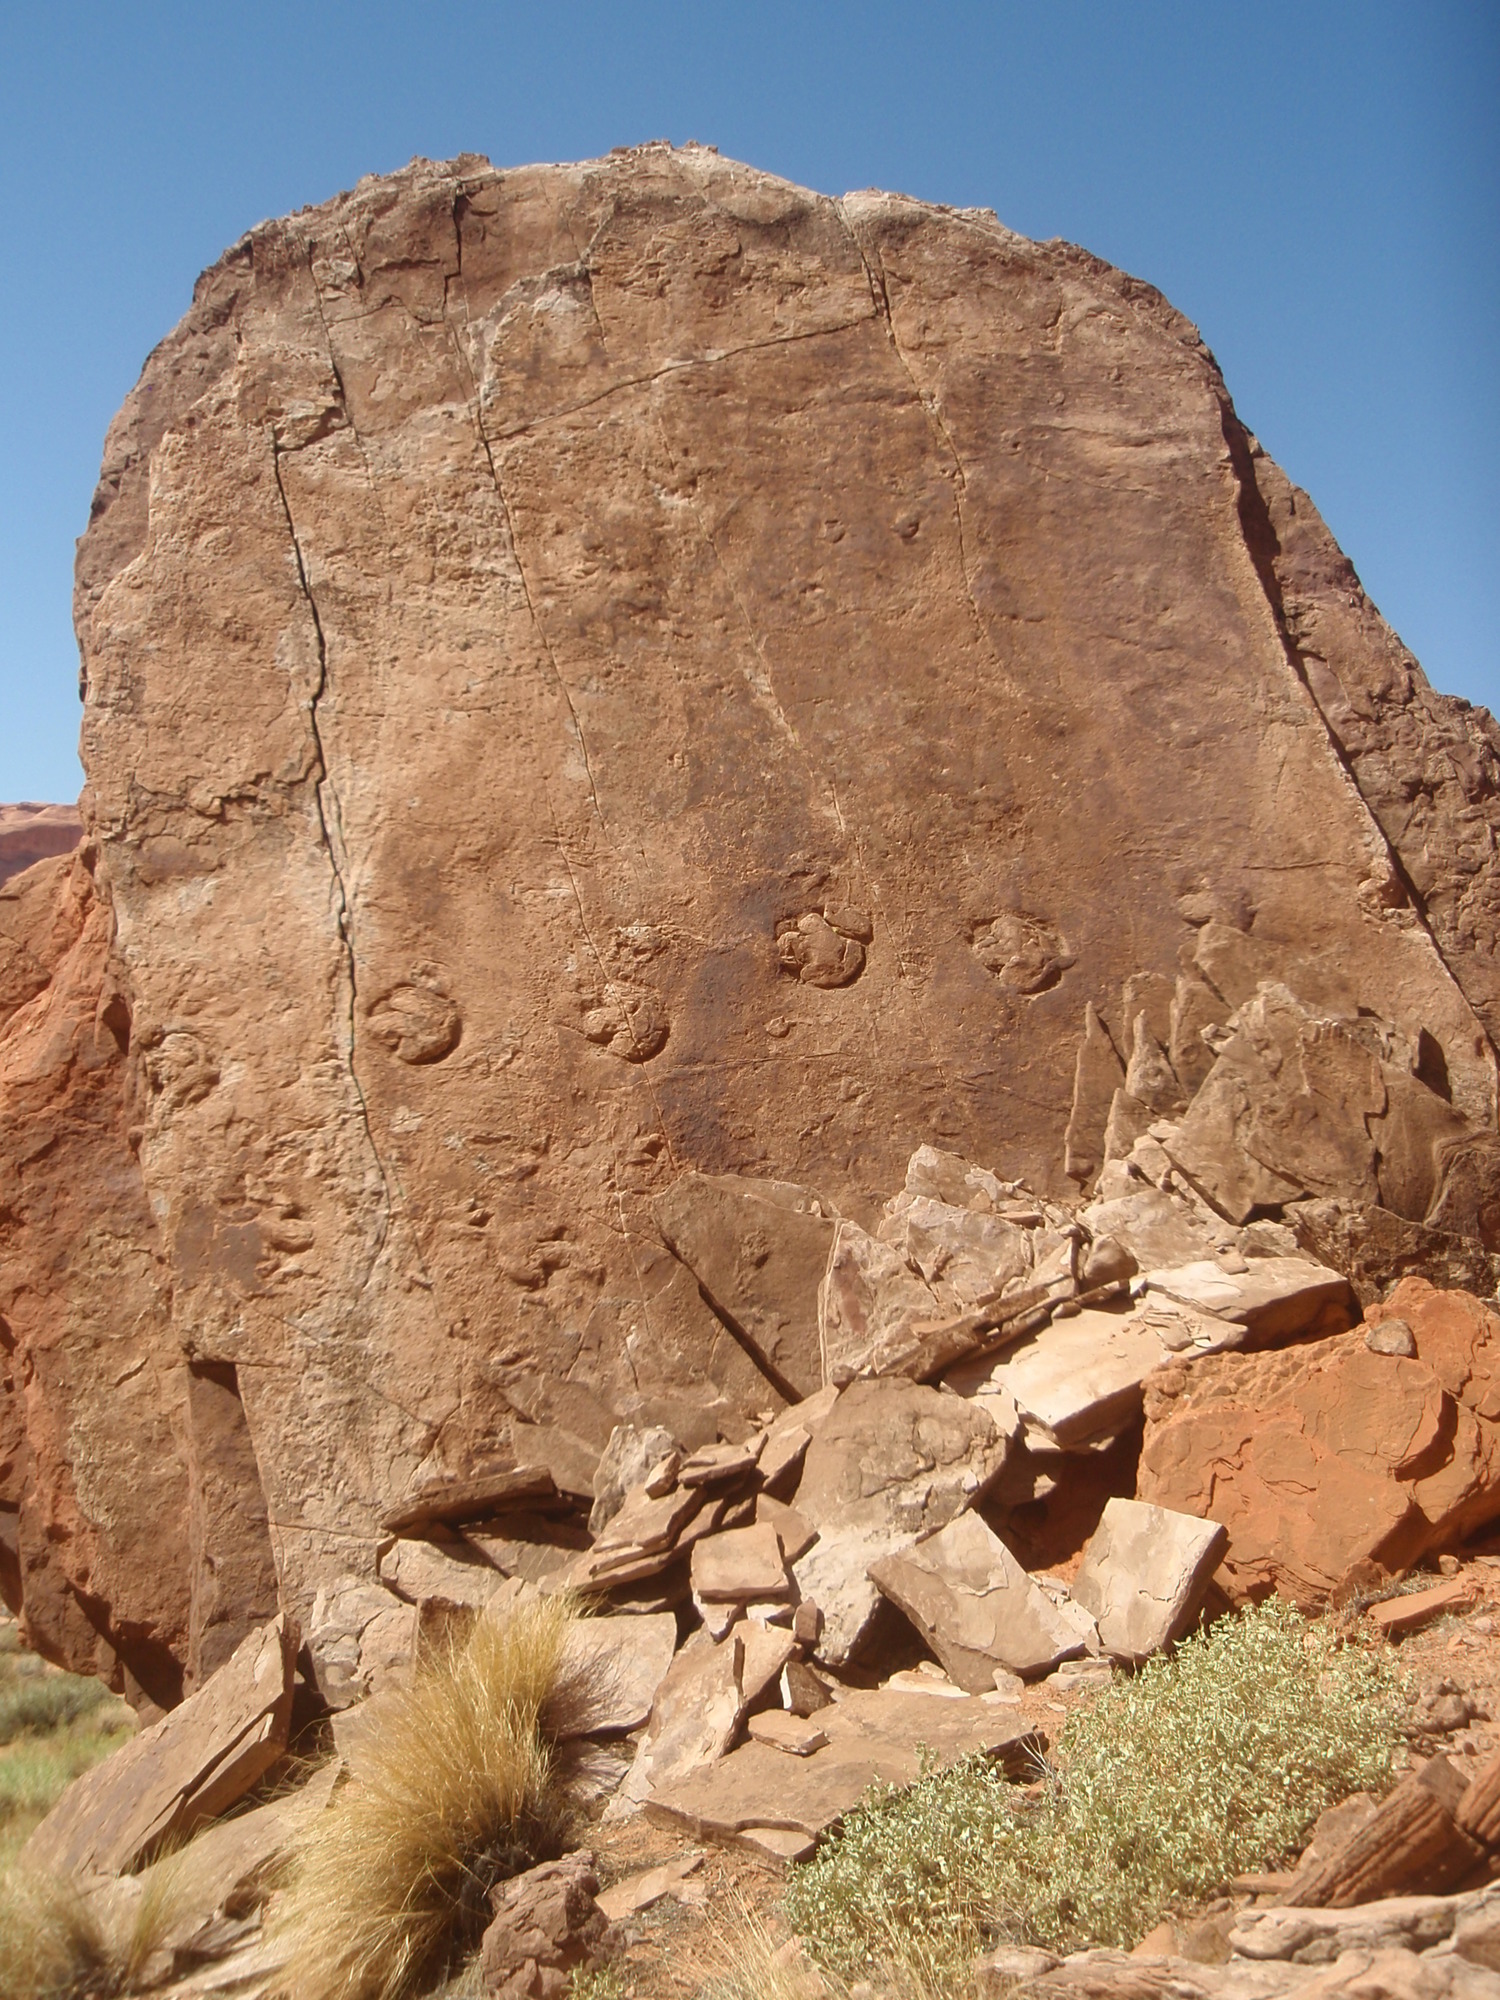 a path of 7 raised footprints go across a tall brown rock face. 